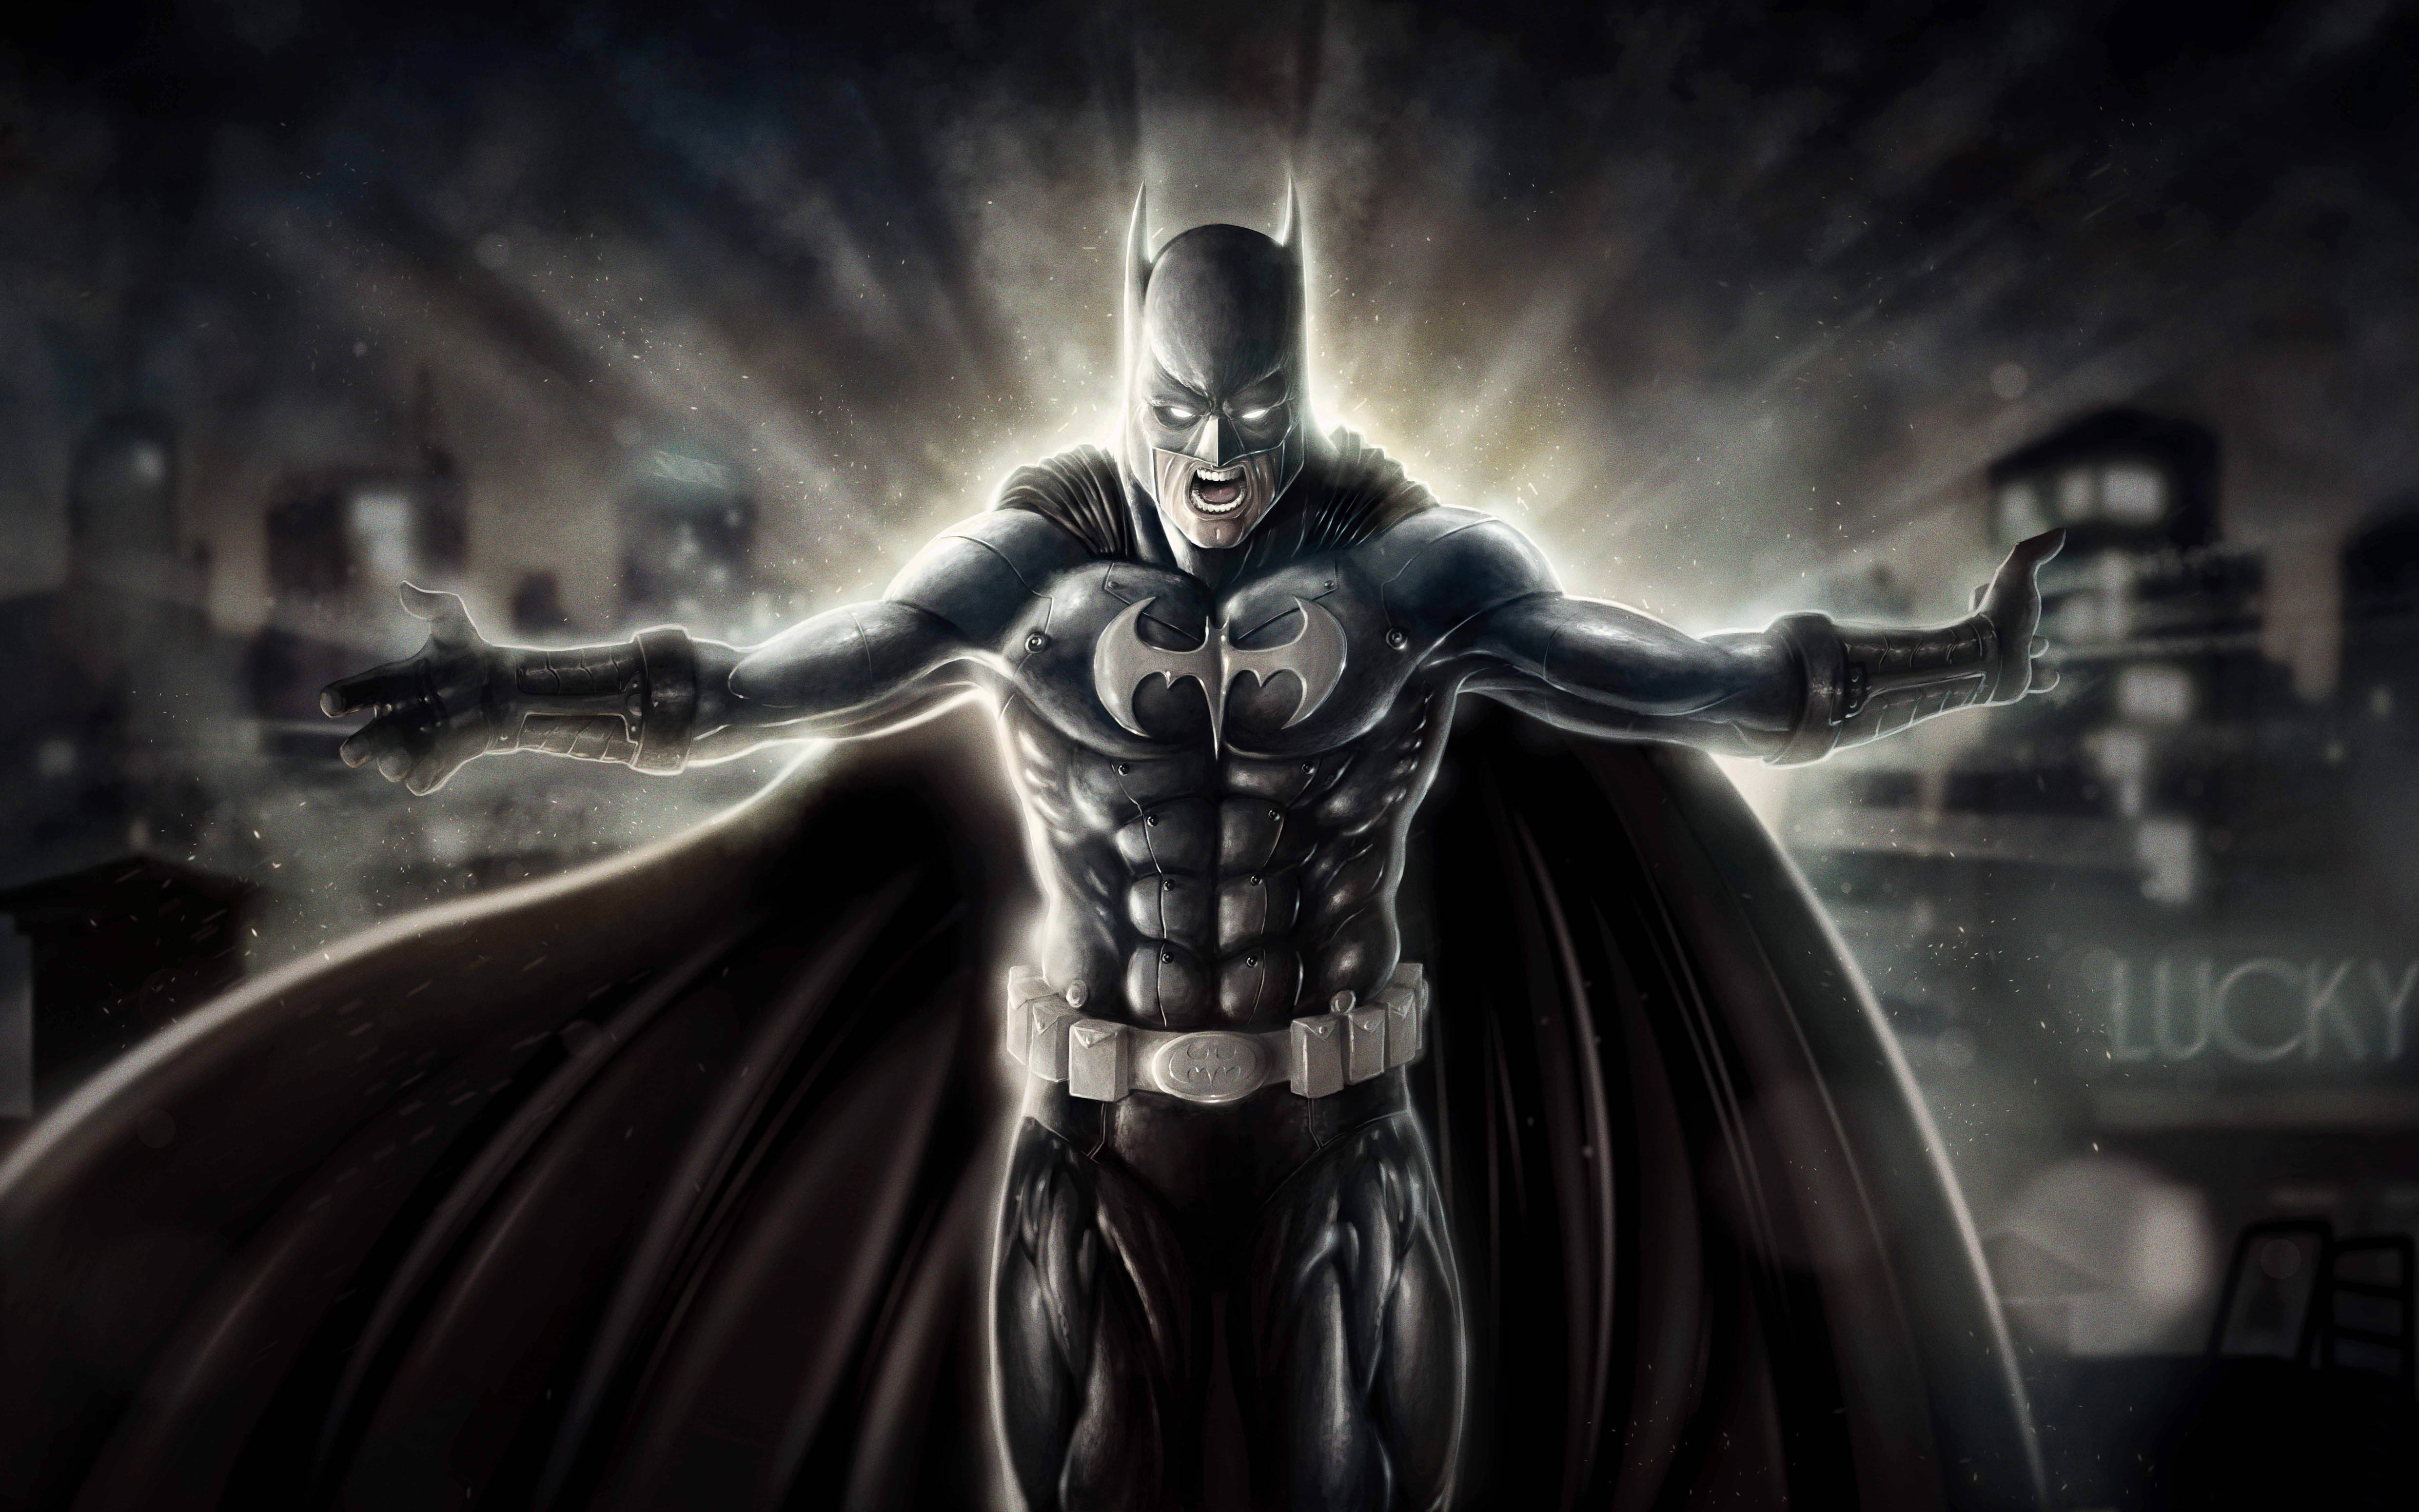 Hd Batman Hd Wallpapers For Mobile Phones And Laptops ...